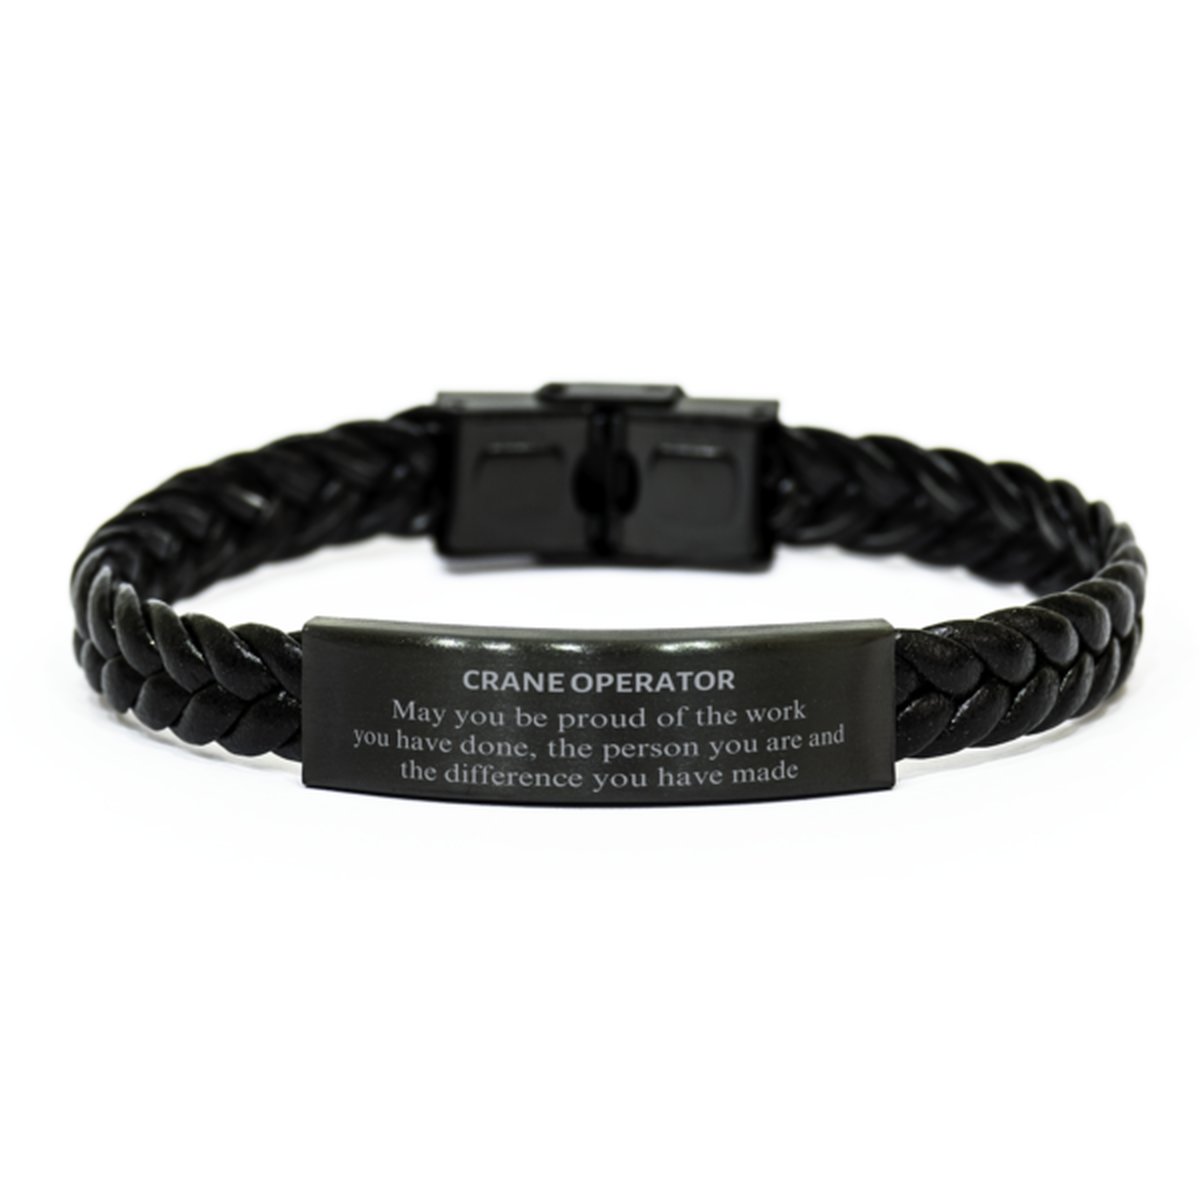 Crane Operator May you be proud of the work you have done, Retirement Crane Operator Braided Leather Bracelet for Colleague Appreciation Gifts Amazing for Crane Operator